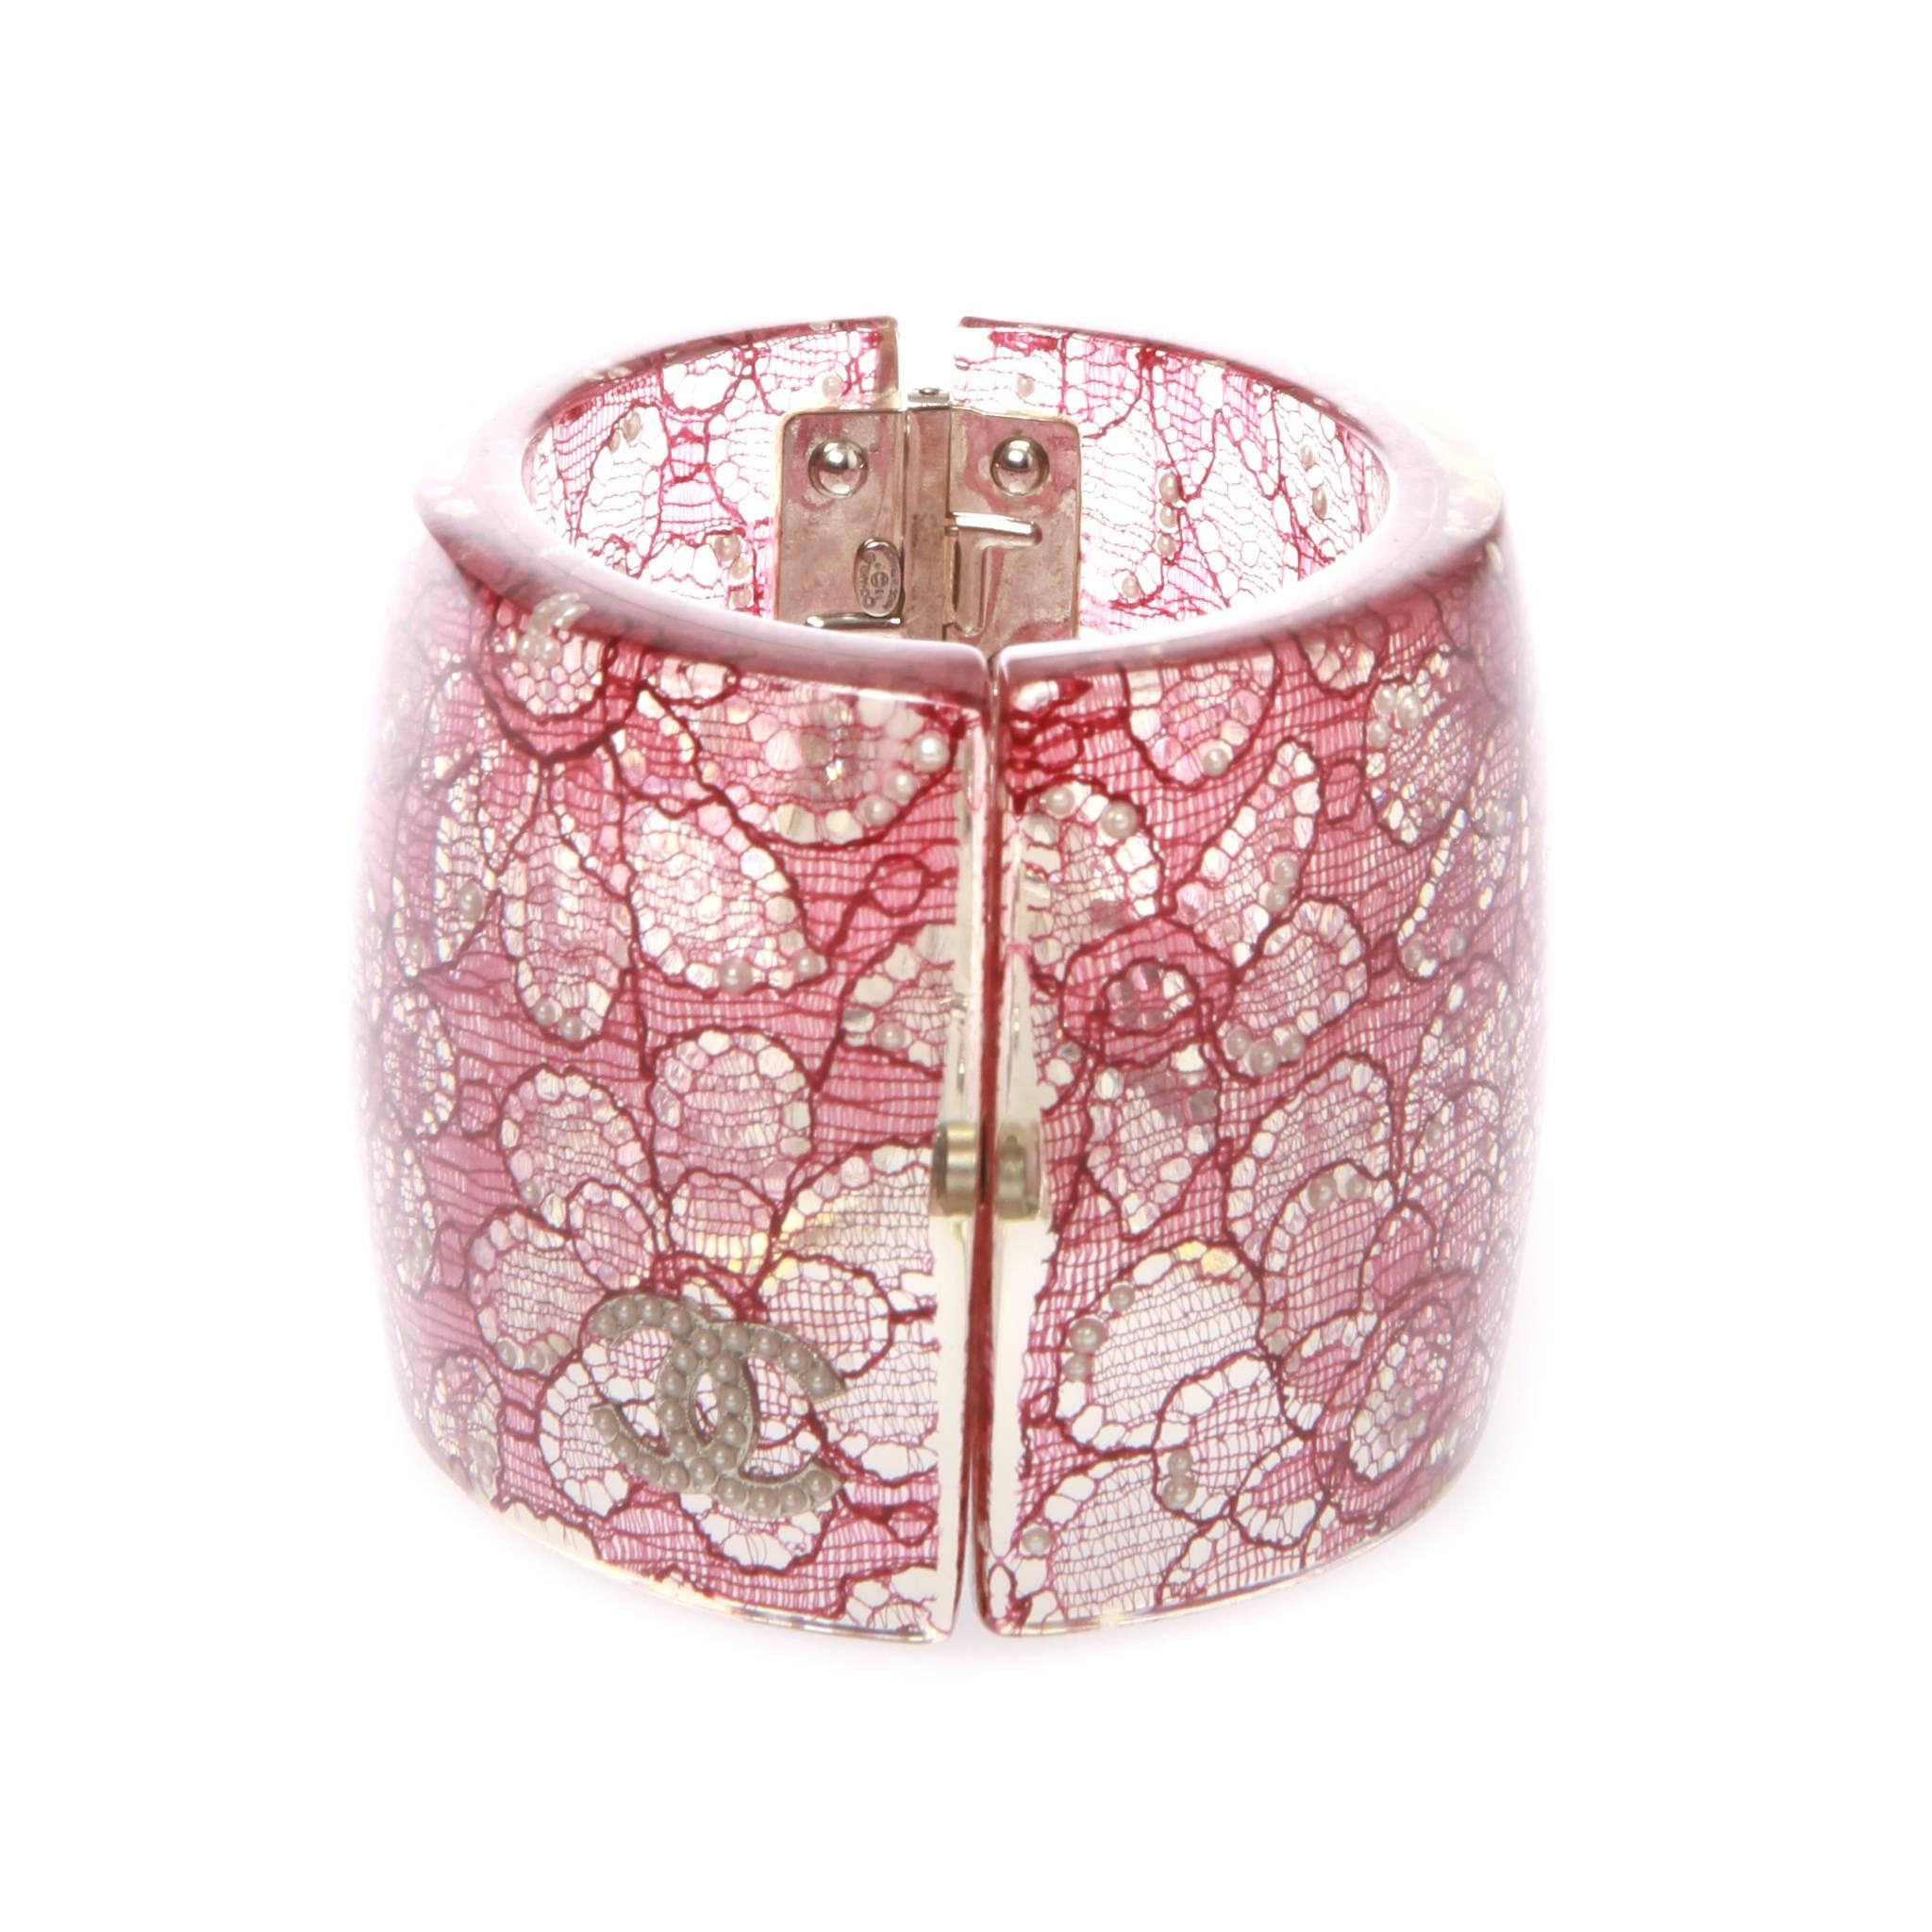 	
A stunning CHANEL Camelia lace and faux pearls embellished clear resin cuff.
It features clear resin and pink lace embellished hinged cuff with faux pearls throughout, and a hinged magnetic clasp closure.
Add this Investment piece to your